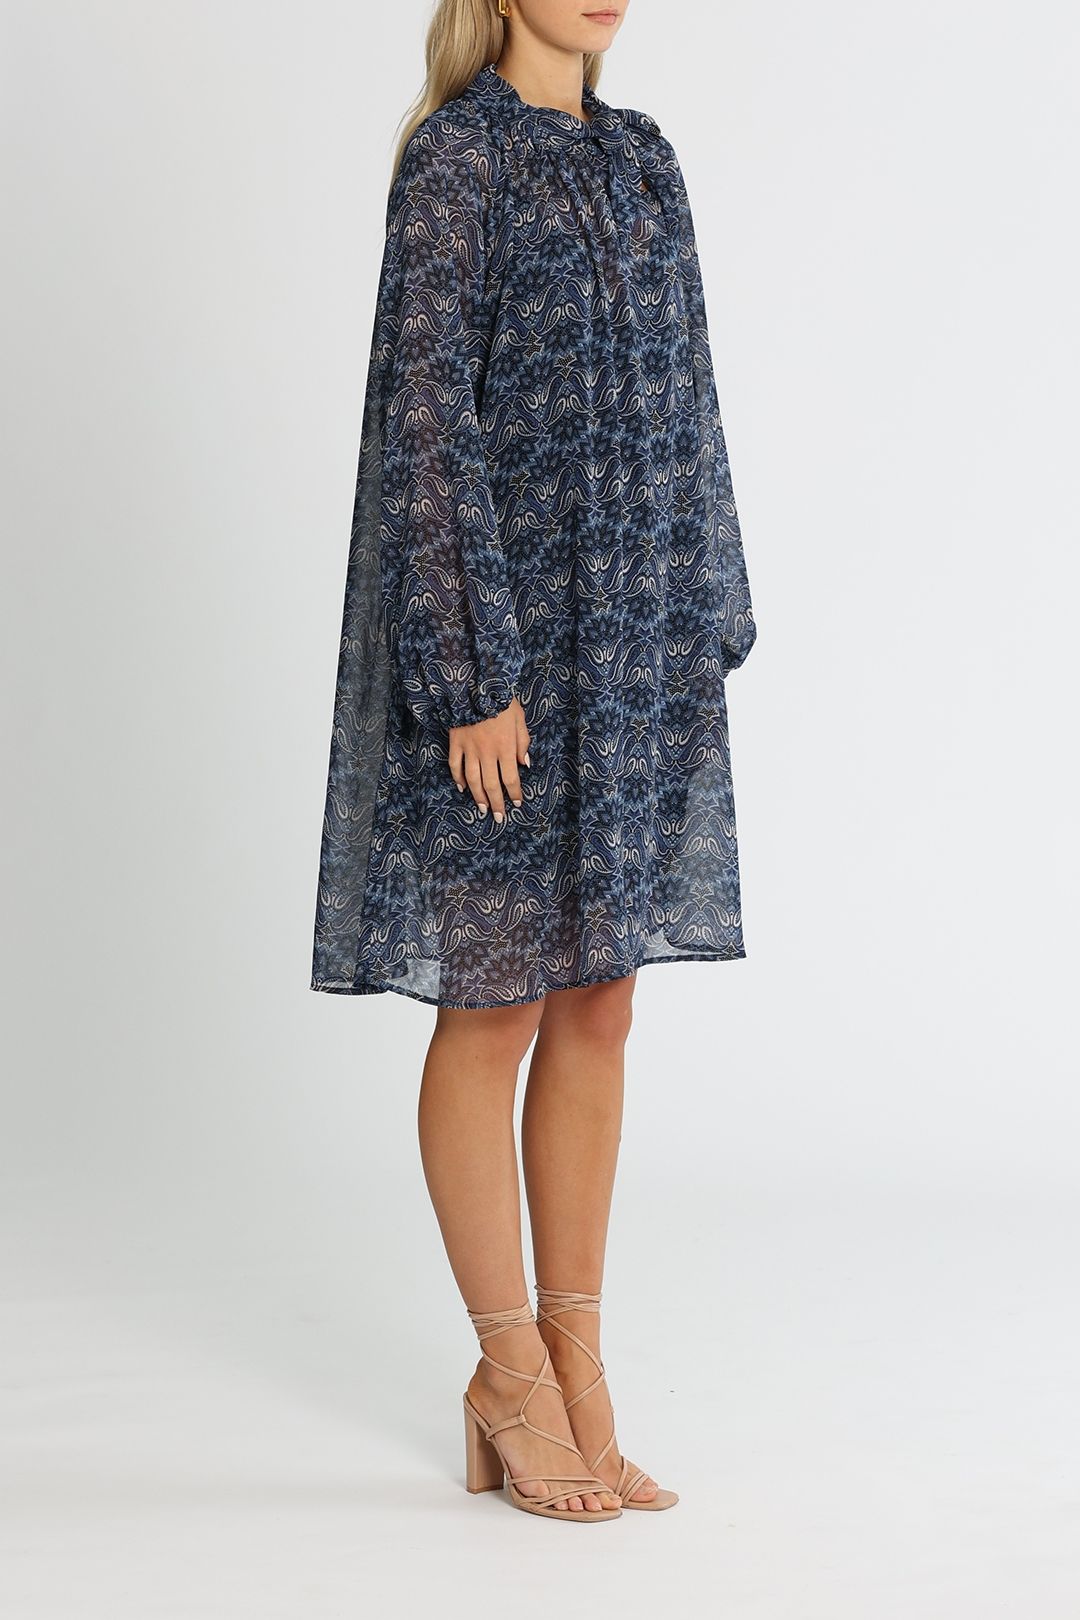 Kate Sylvester Paisley Smock Dress Blue Relaxed Fit